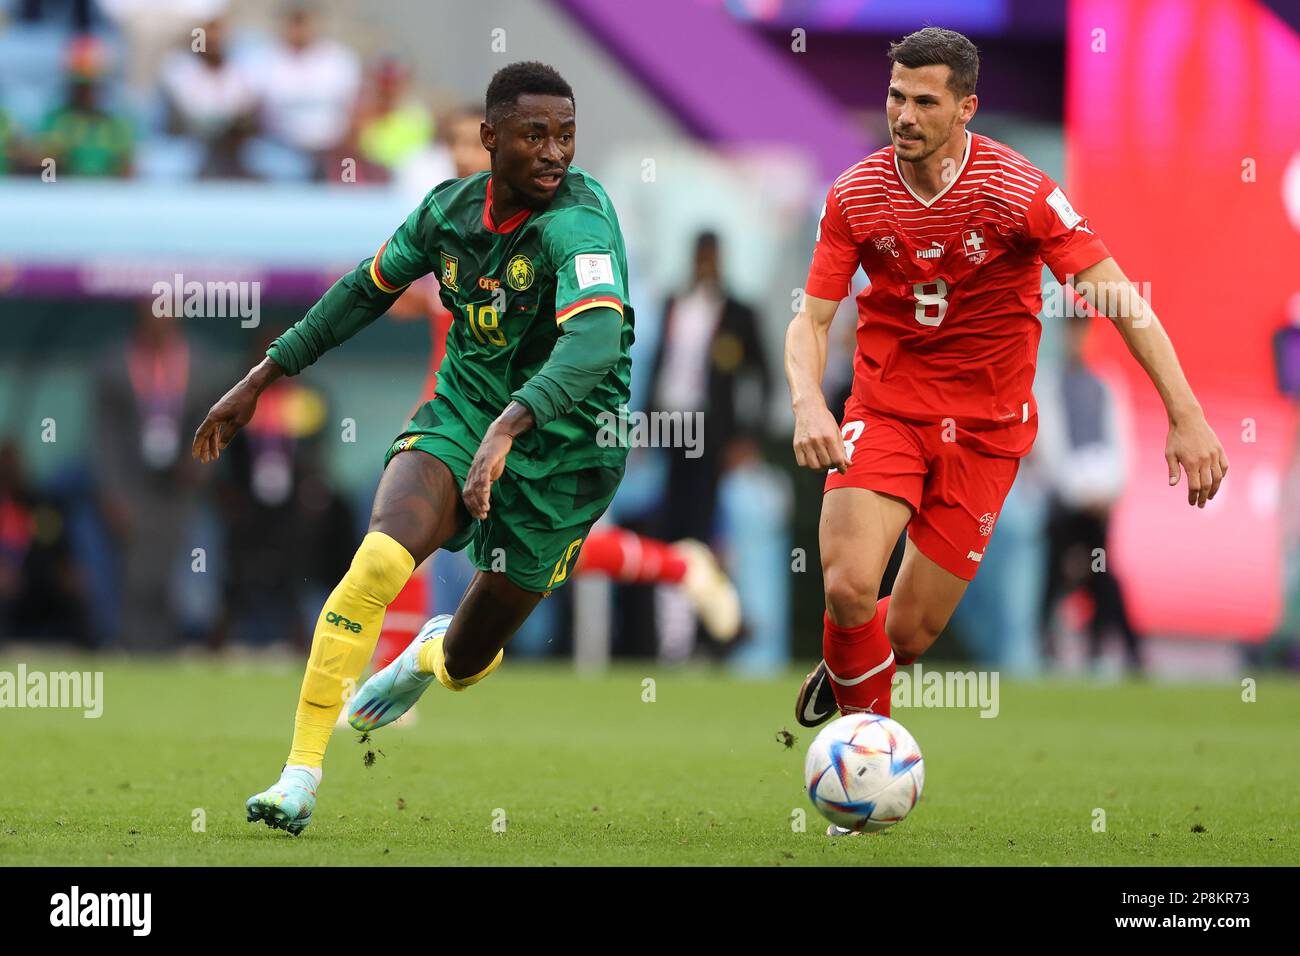 Martin Hongla of Cameroon (L) and Remo Freuler of Switzerland (R) in action during the FIFA World Cup Qatar 2022 match between Switzerland and Cameroon at Al Janoub Stadium. Final score: Switzerland 1:0 Cameroon. Stock Photo